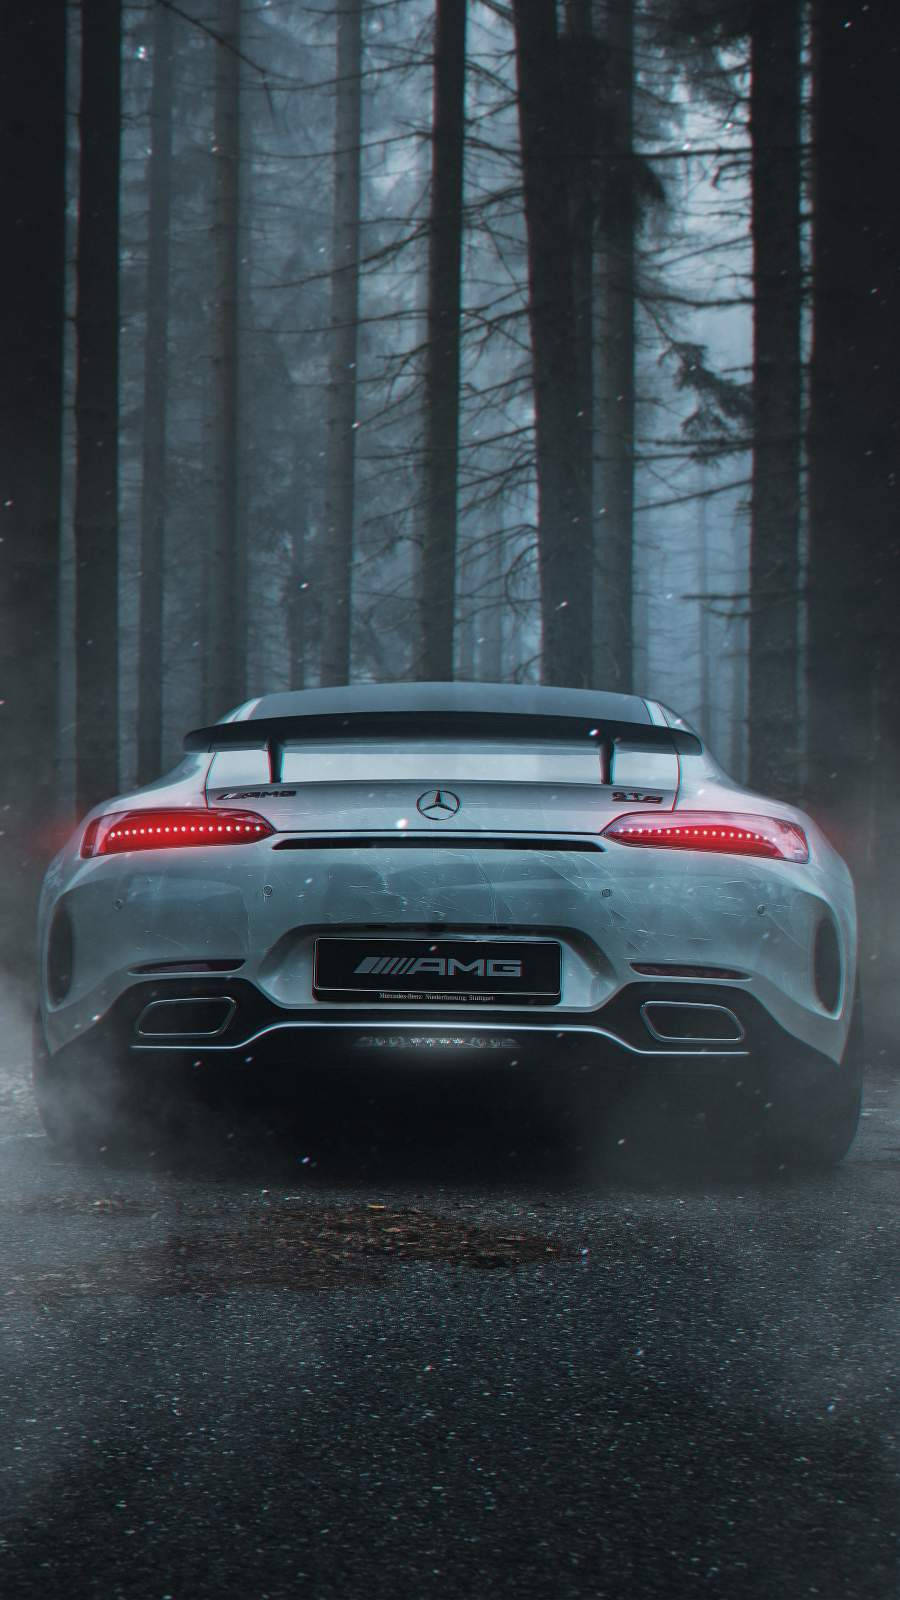 Mercedes-amg Misty Forest Iphone